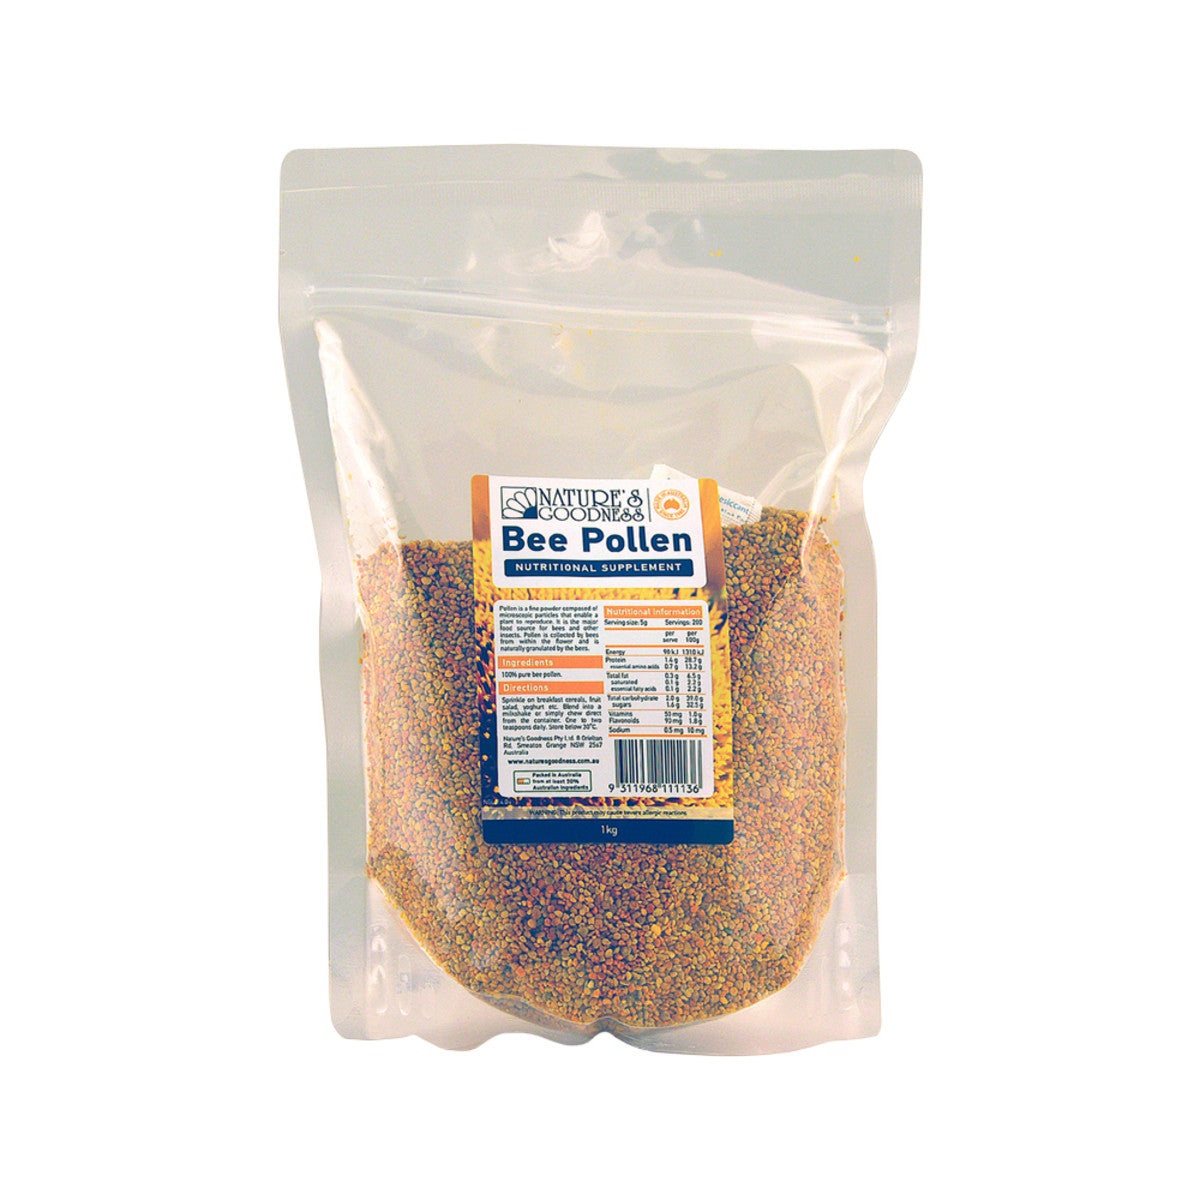 Nature's Goodness Bee Pollen 120g, 250g Or 1Kg, Packed With Vitamins